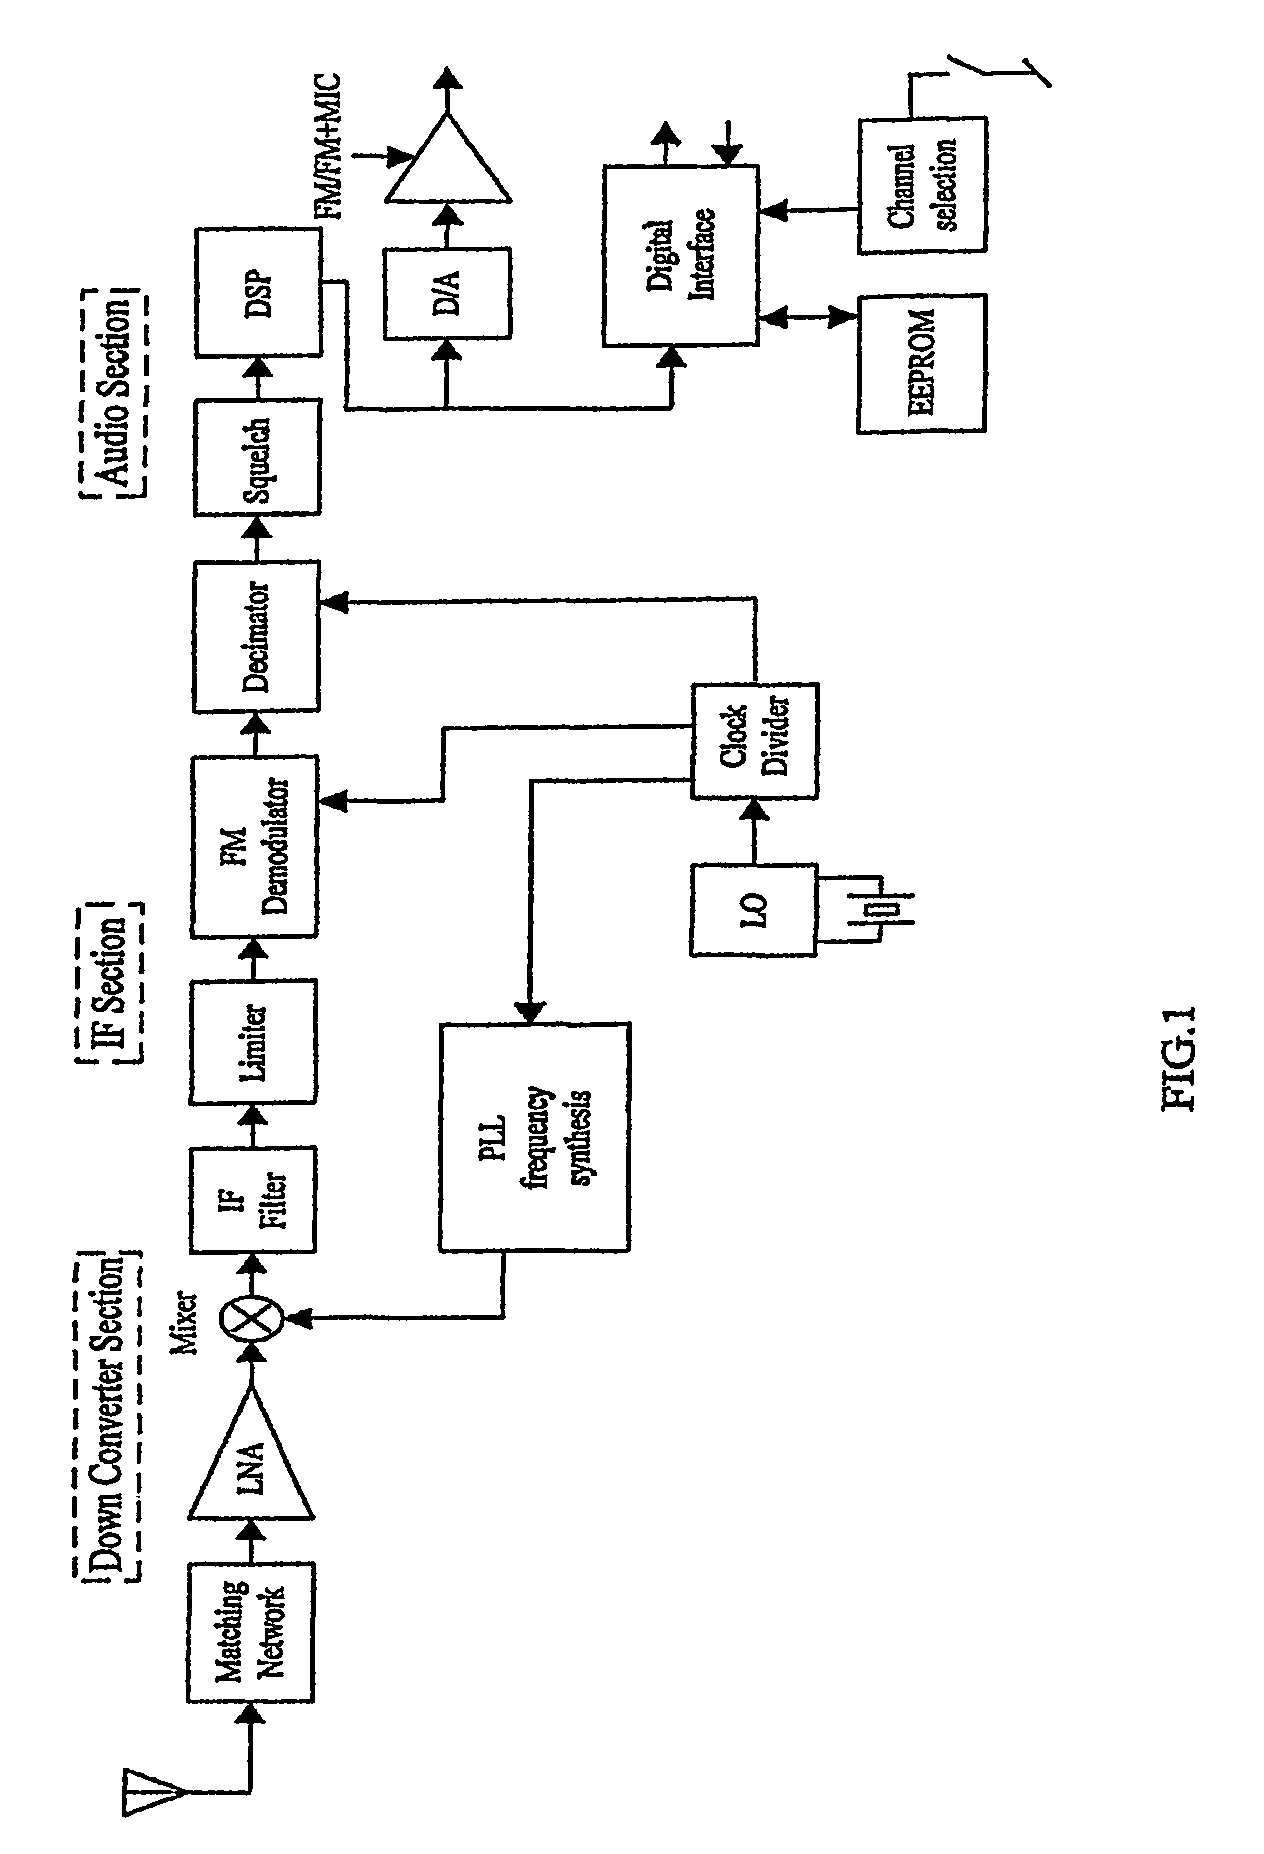 Hearing aid with a radio frequency receiver